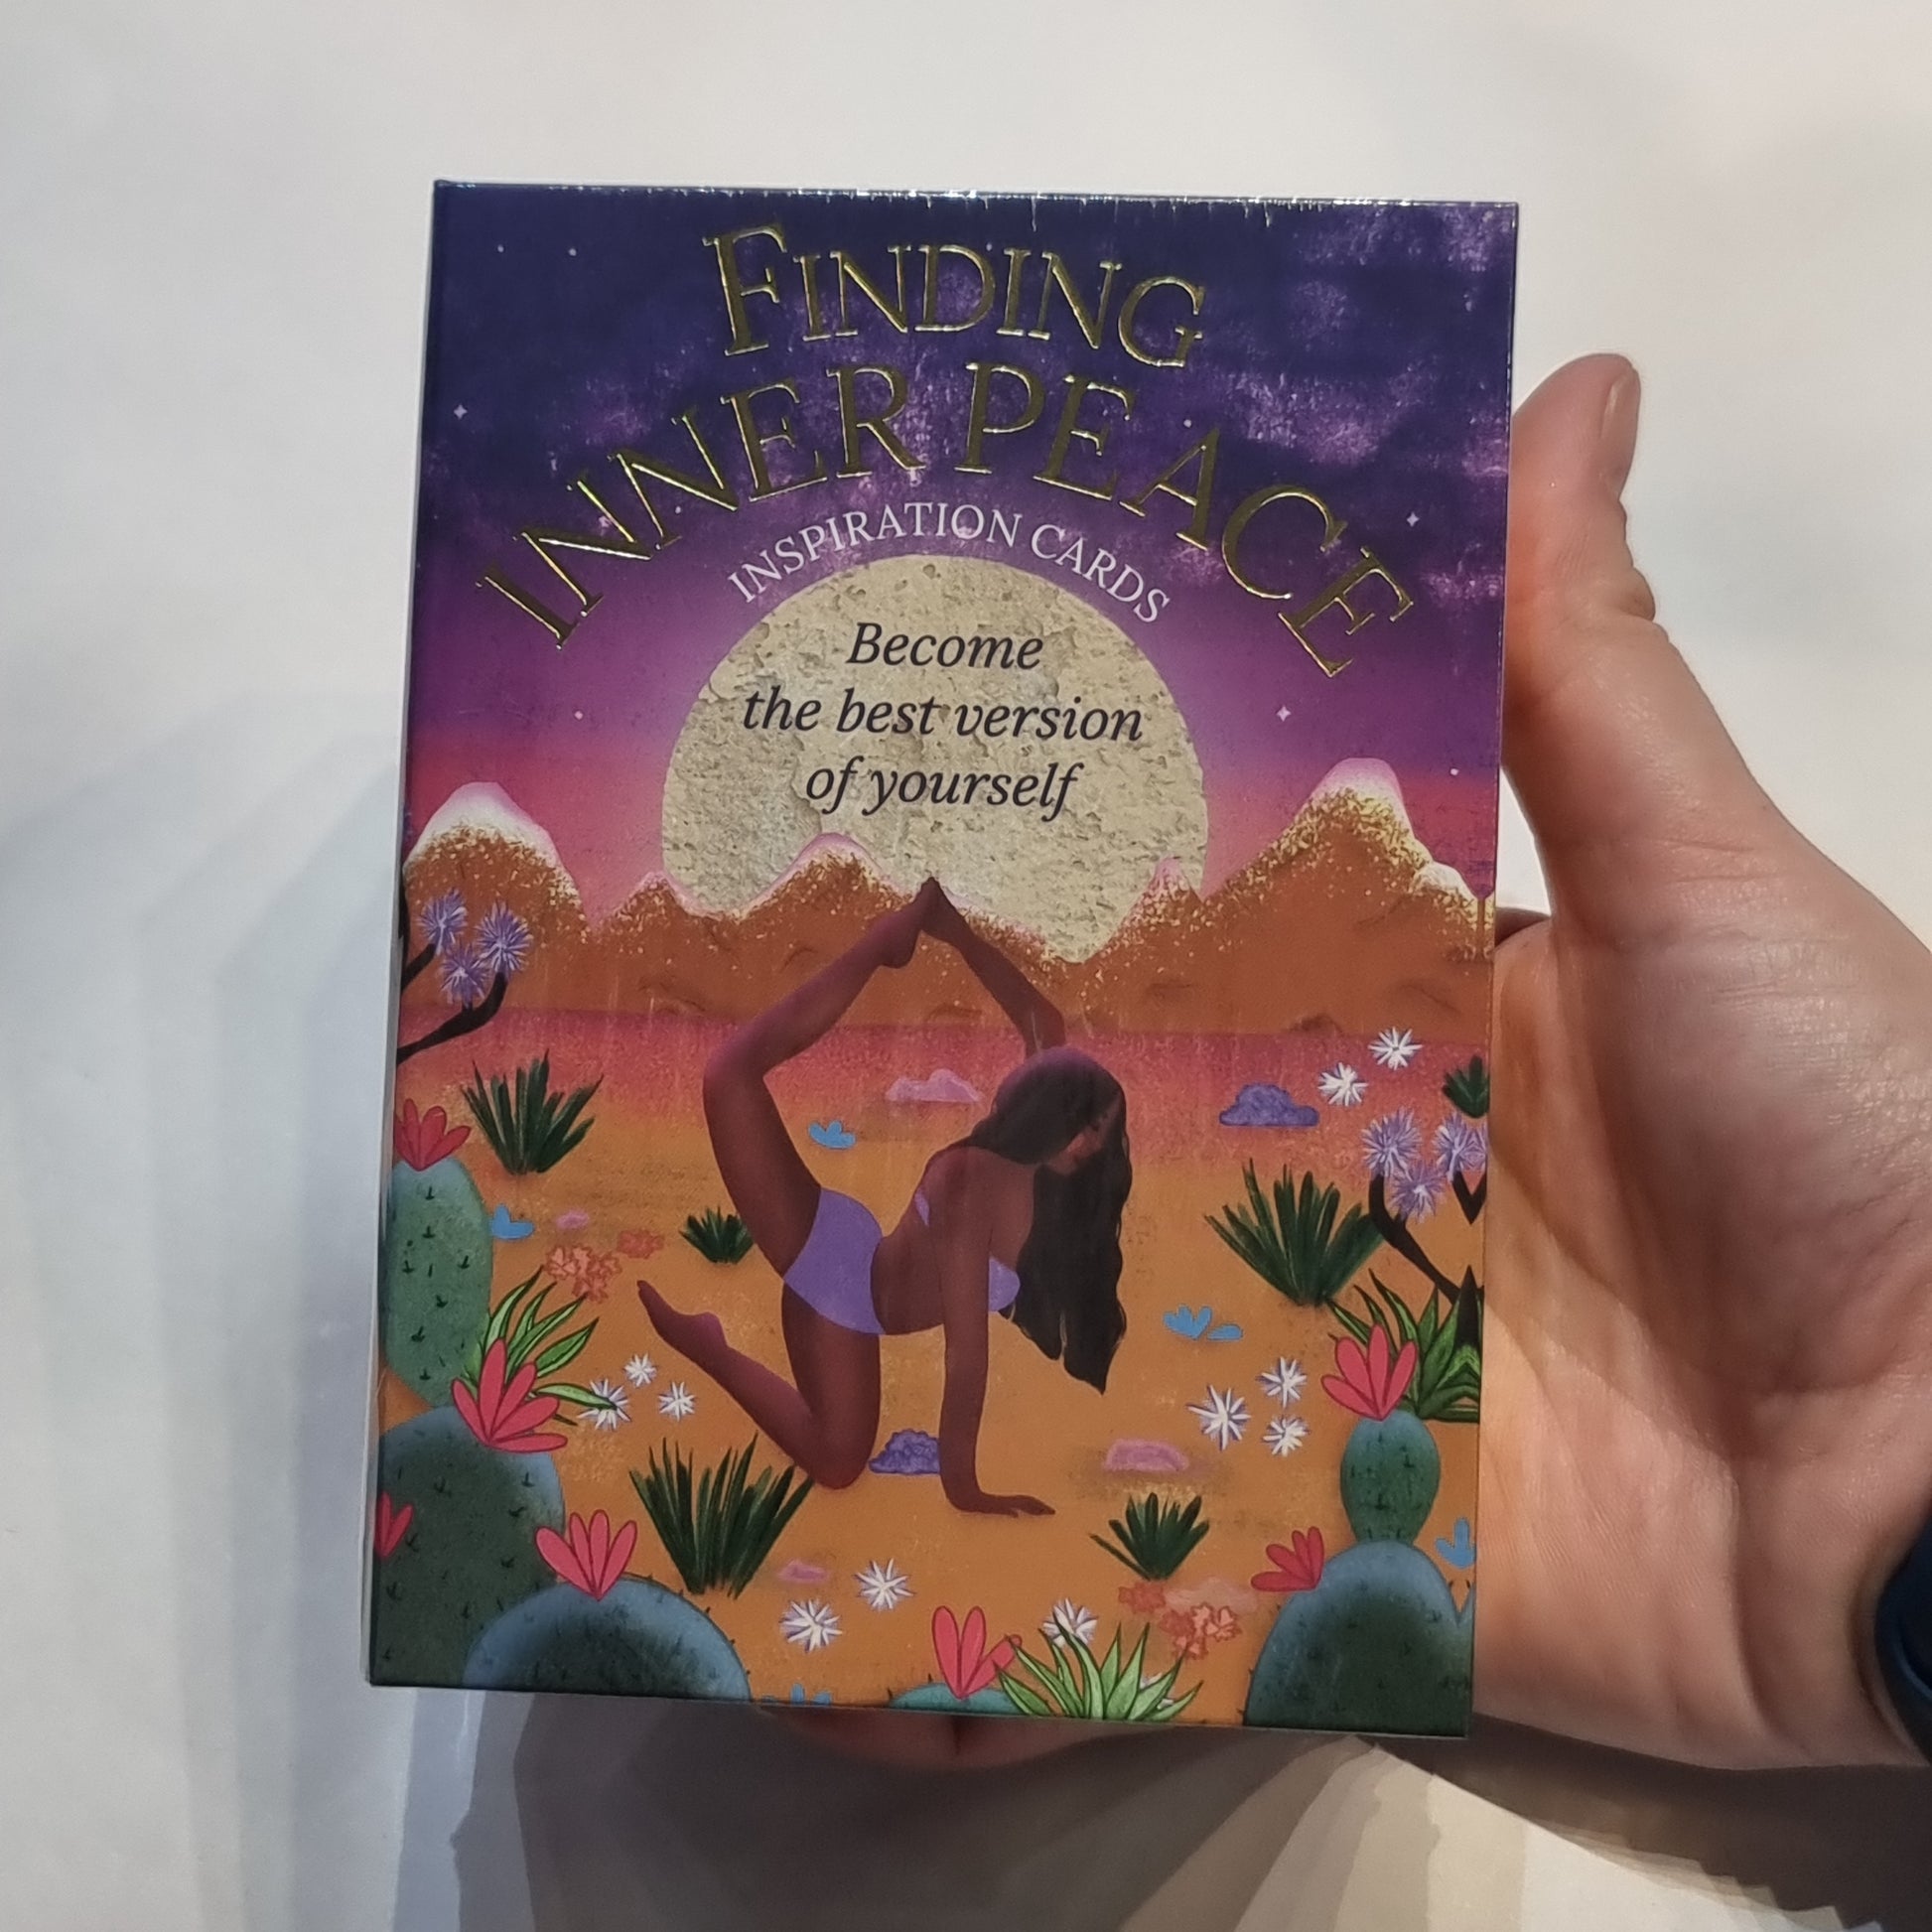 Finding inner peace inspiration cards - Rivendell Shop